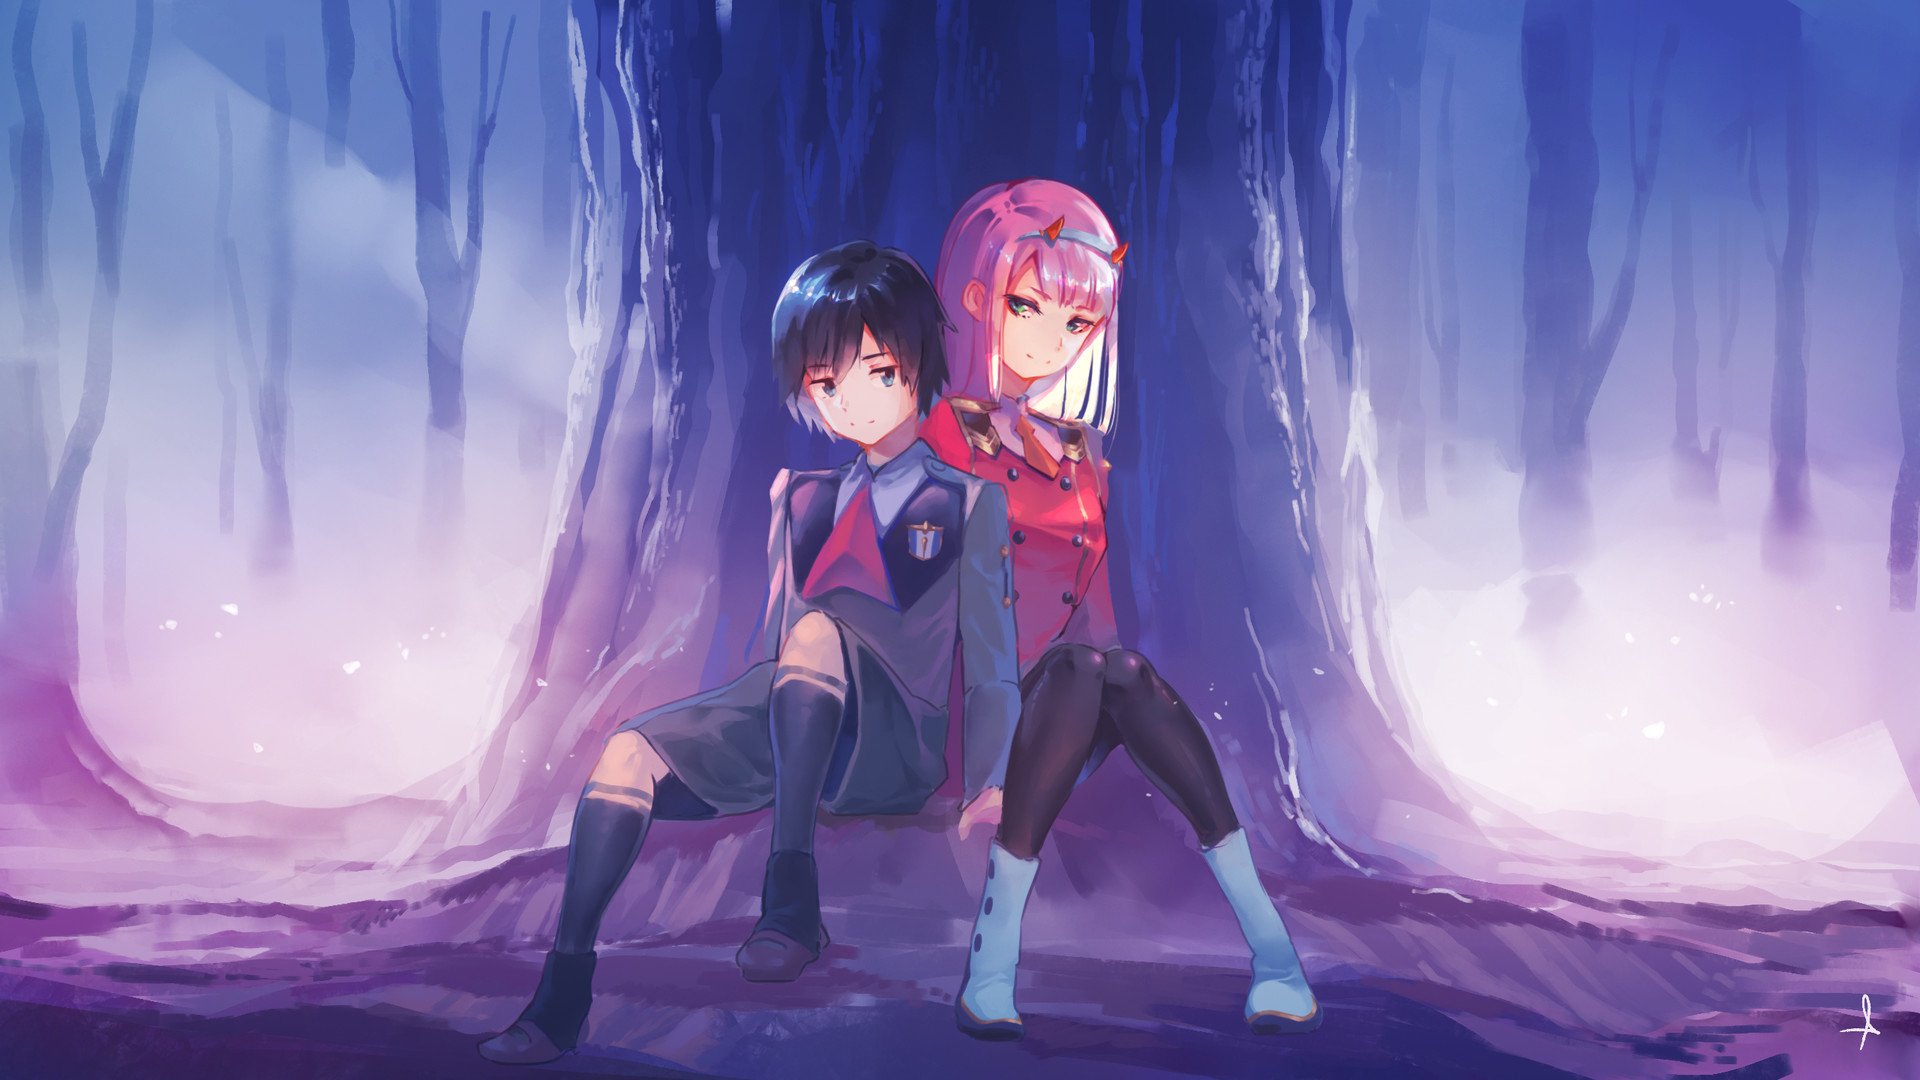 Darling in the franxx zero two hiro sitting in front of tree with shallow Wallpaper of trees 2K anime